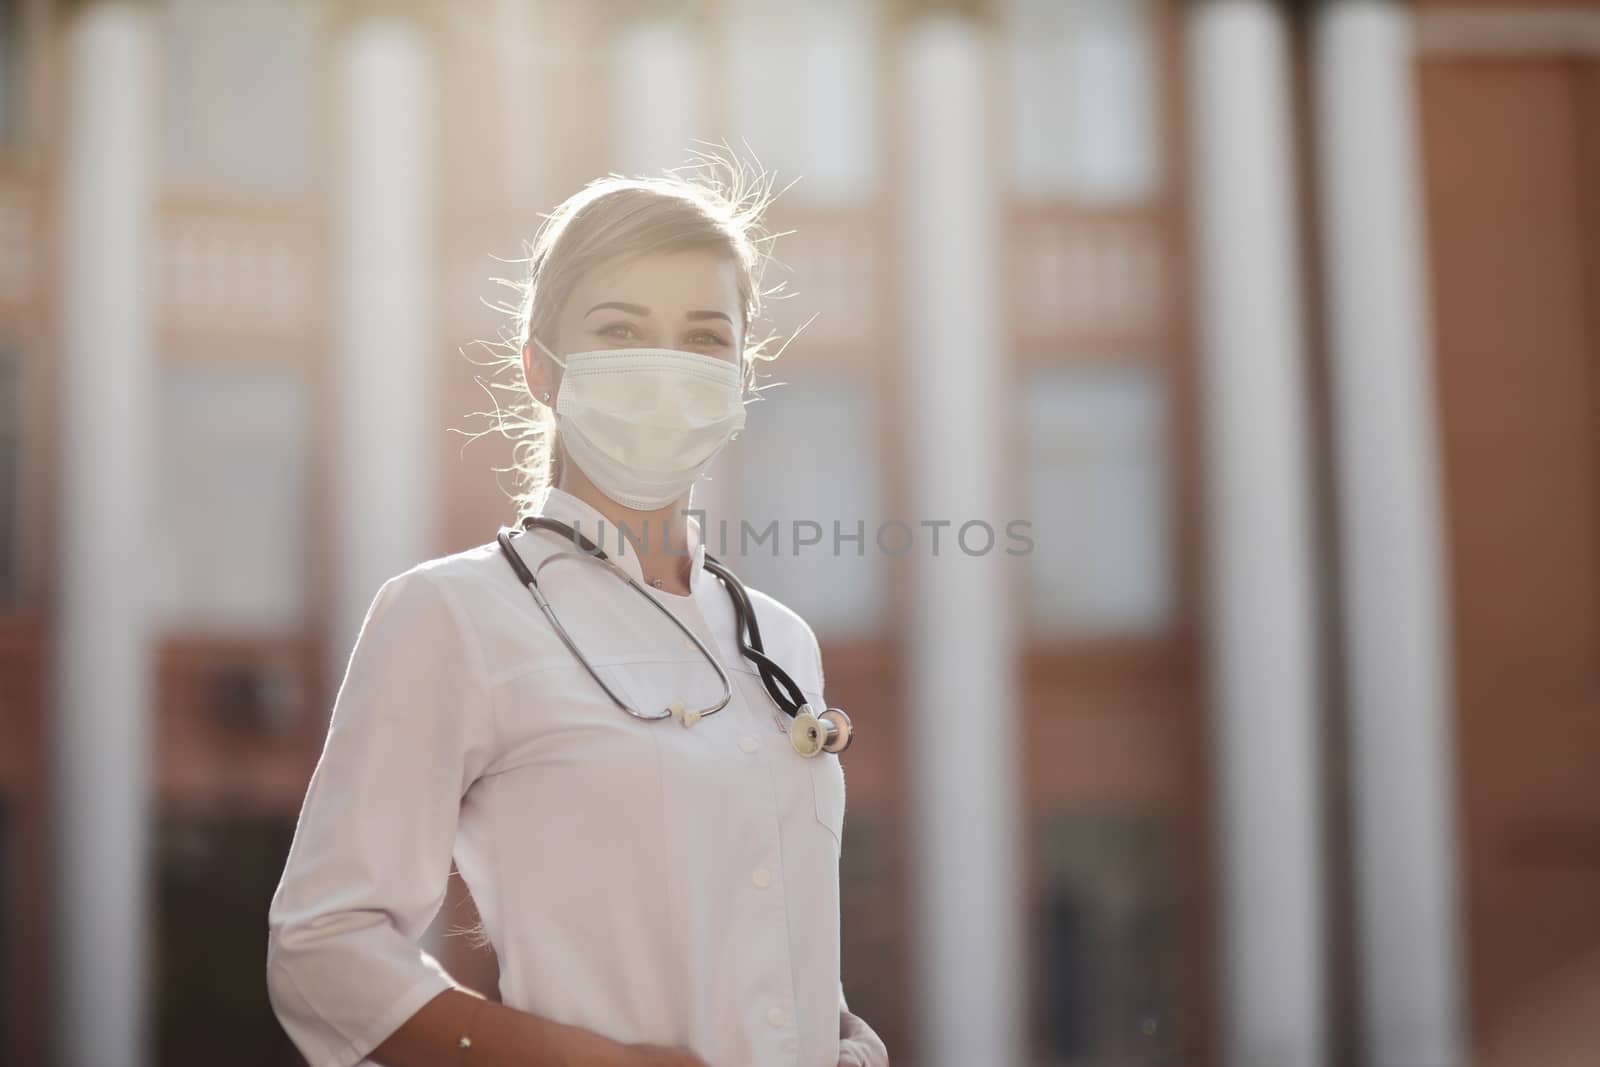 Confident female doctor or nurse wearing a face protective mask. Safety measures against the coronavirus. Prevention Covid-19 healthcare concept. Stethoscope over the neck. Woman, girl.